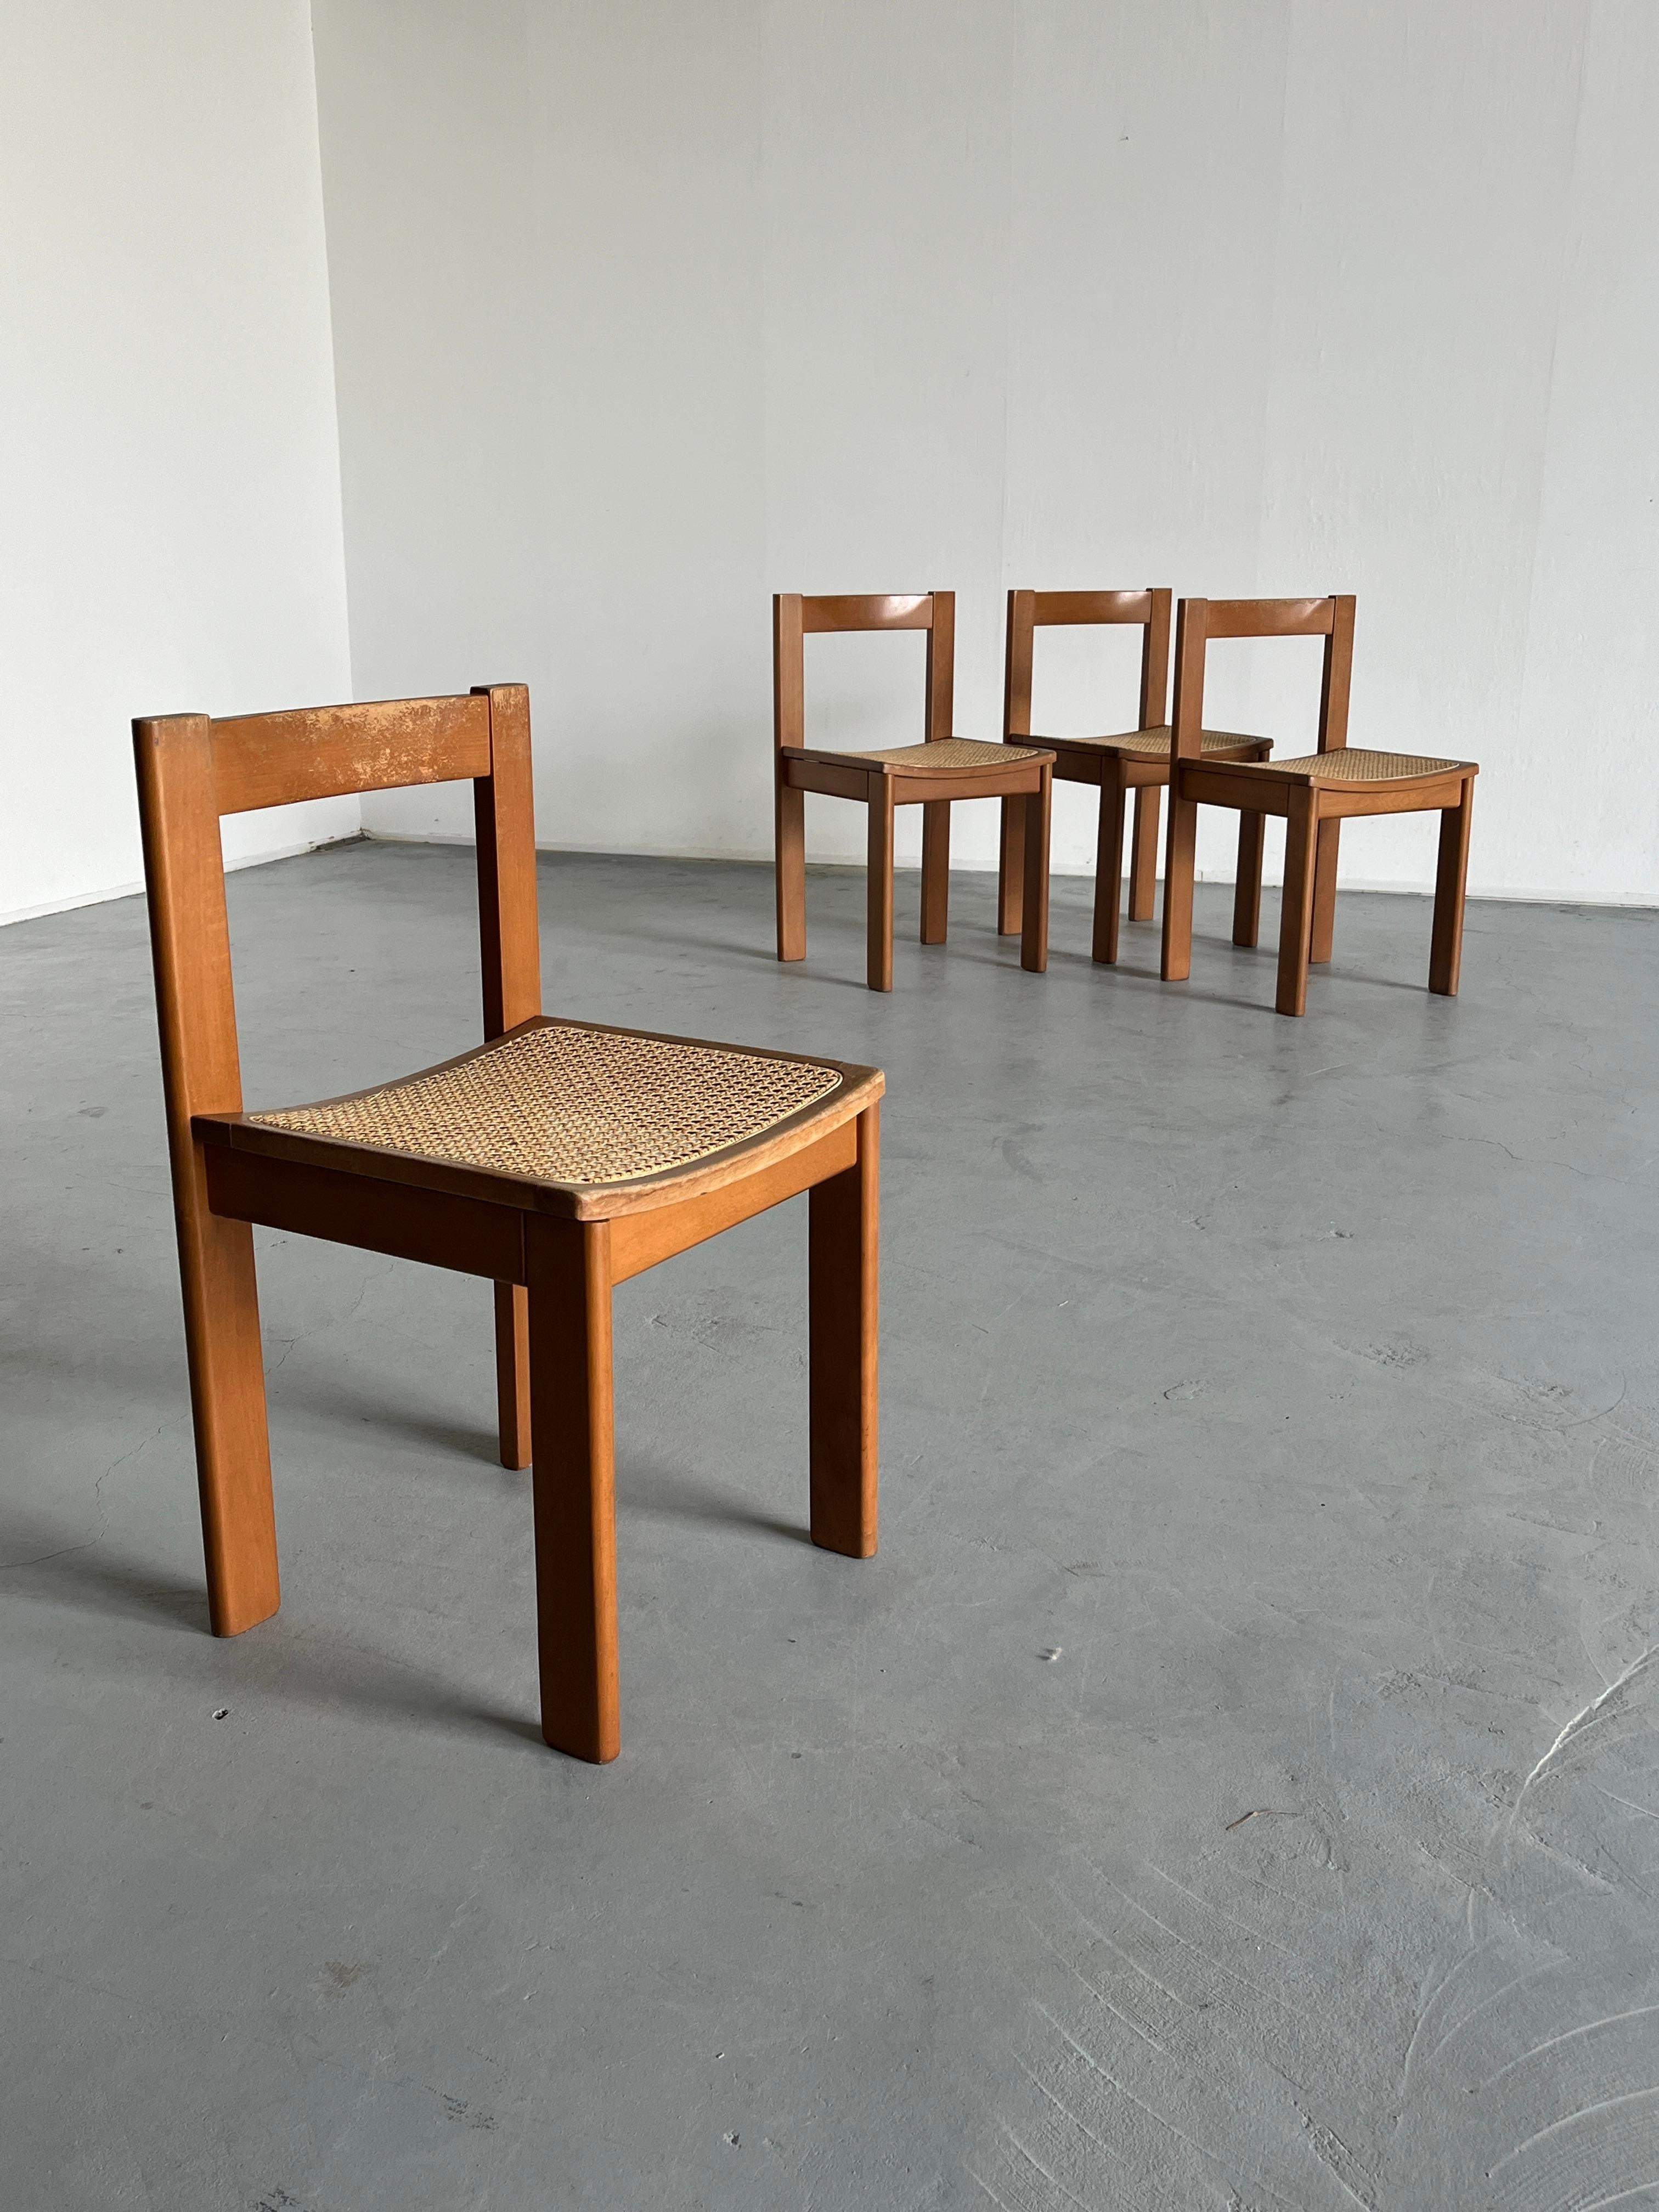 Set of 4 Vintage Mid-Century Modern Constructivist Wooden Dining Chairs, 1960s In Good Condition For Sale In Zagreb, HR